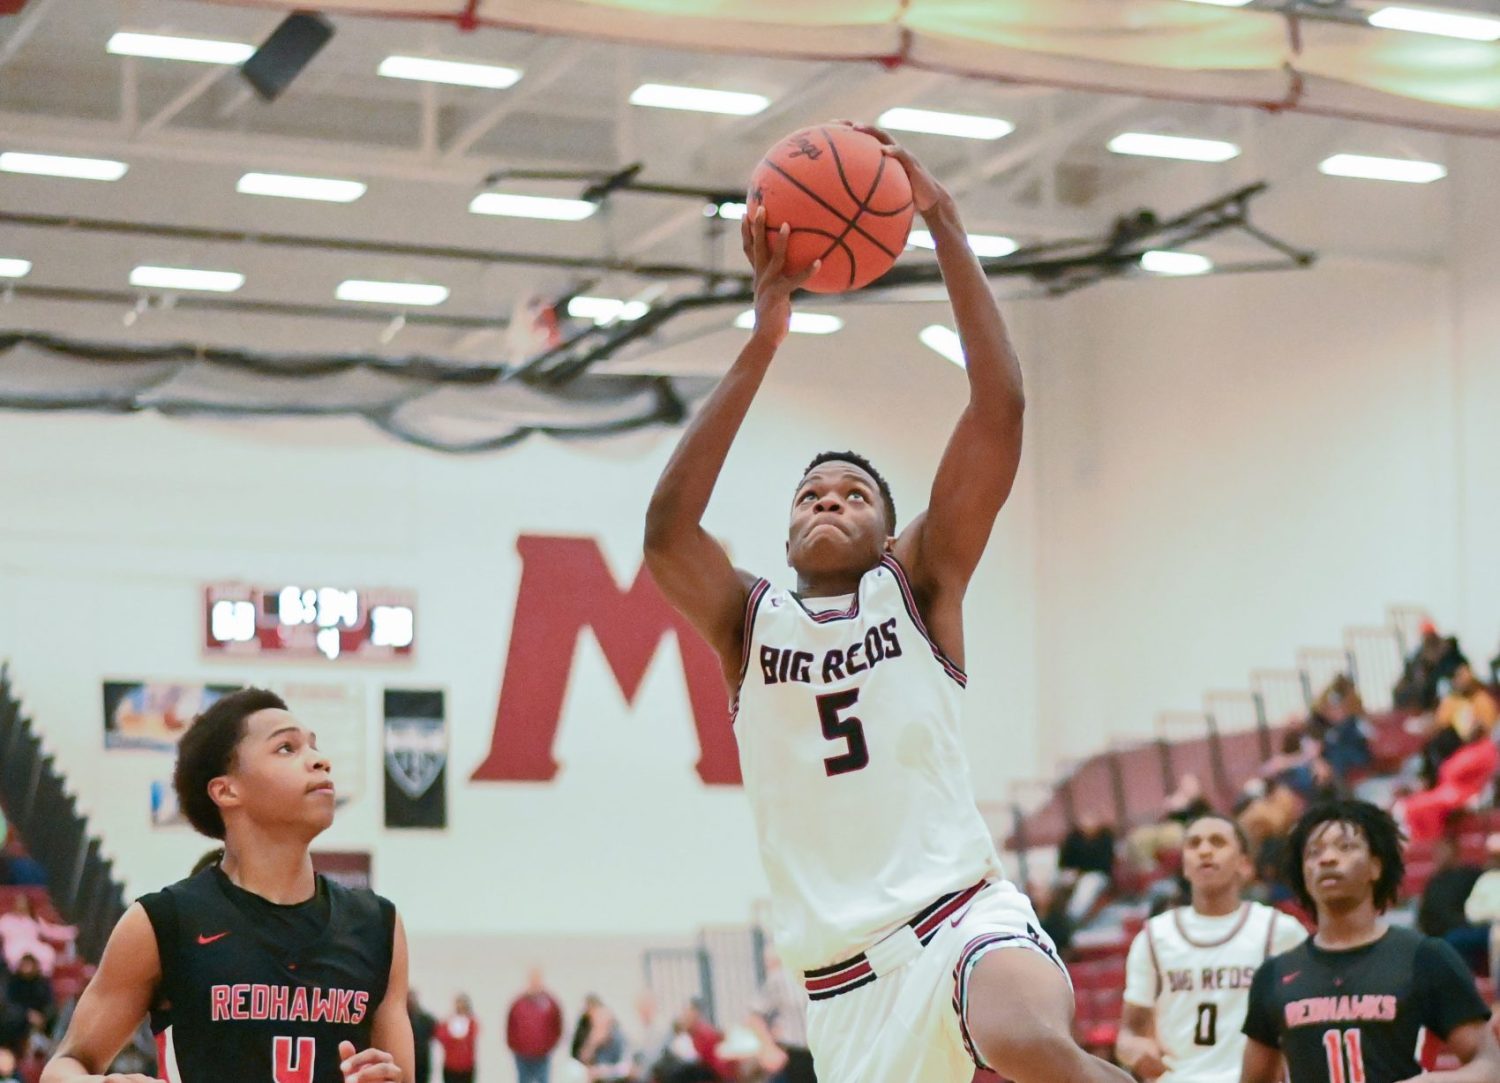 Muskegon Big Reds crush Grand Rapids Union with strong defensive performance